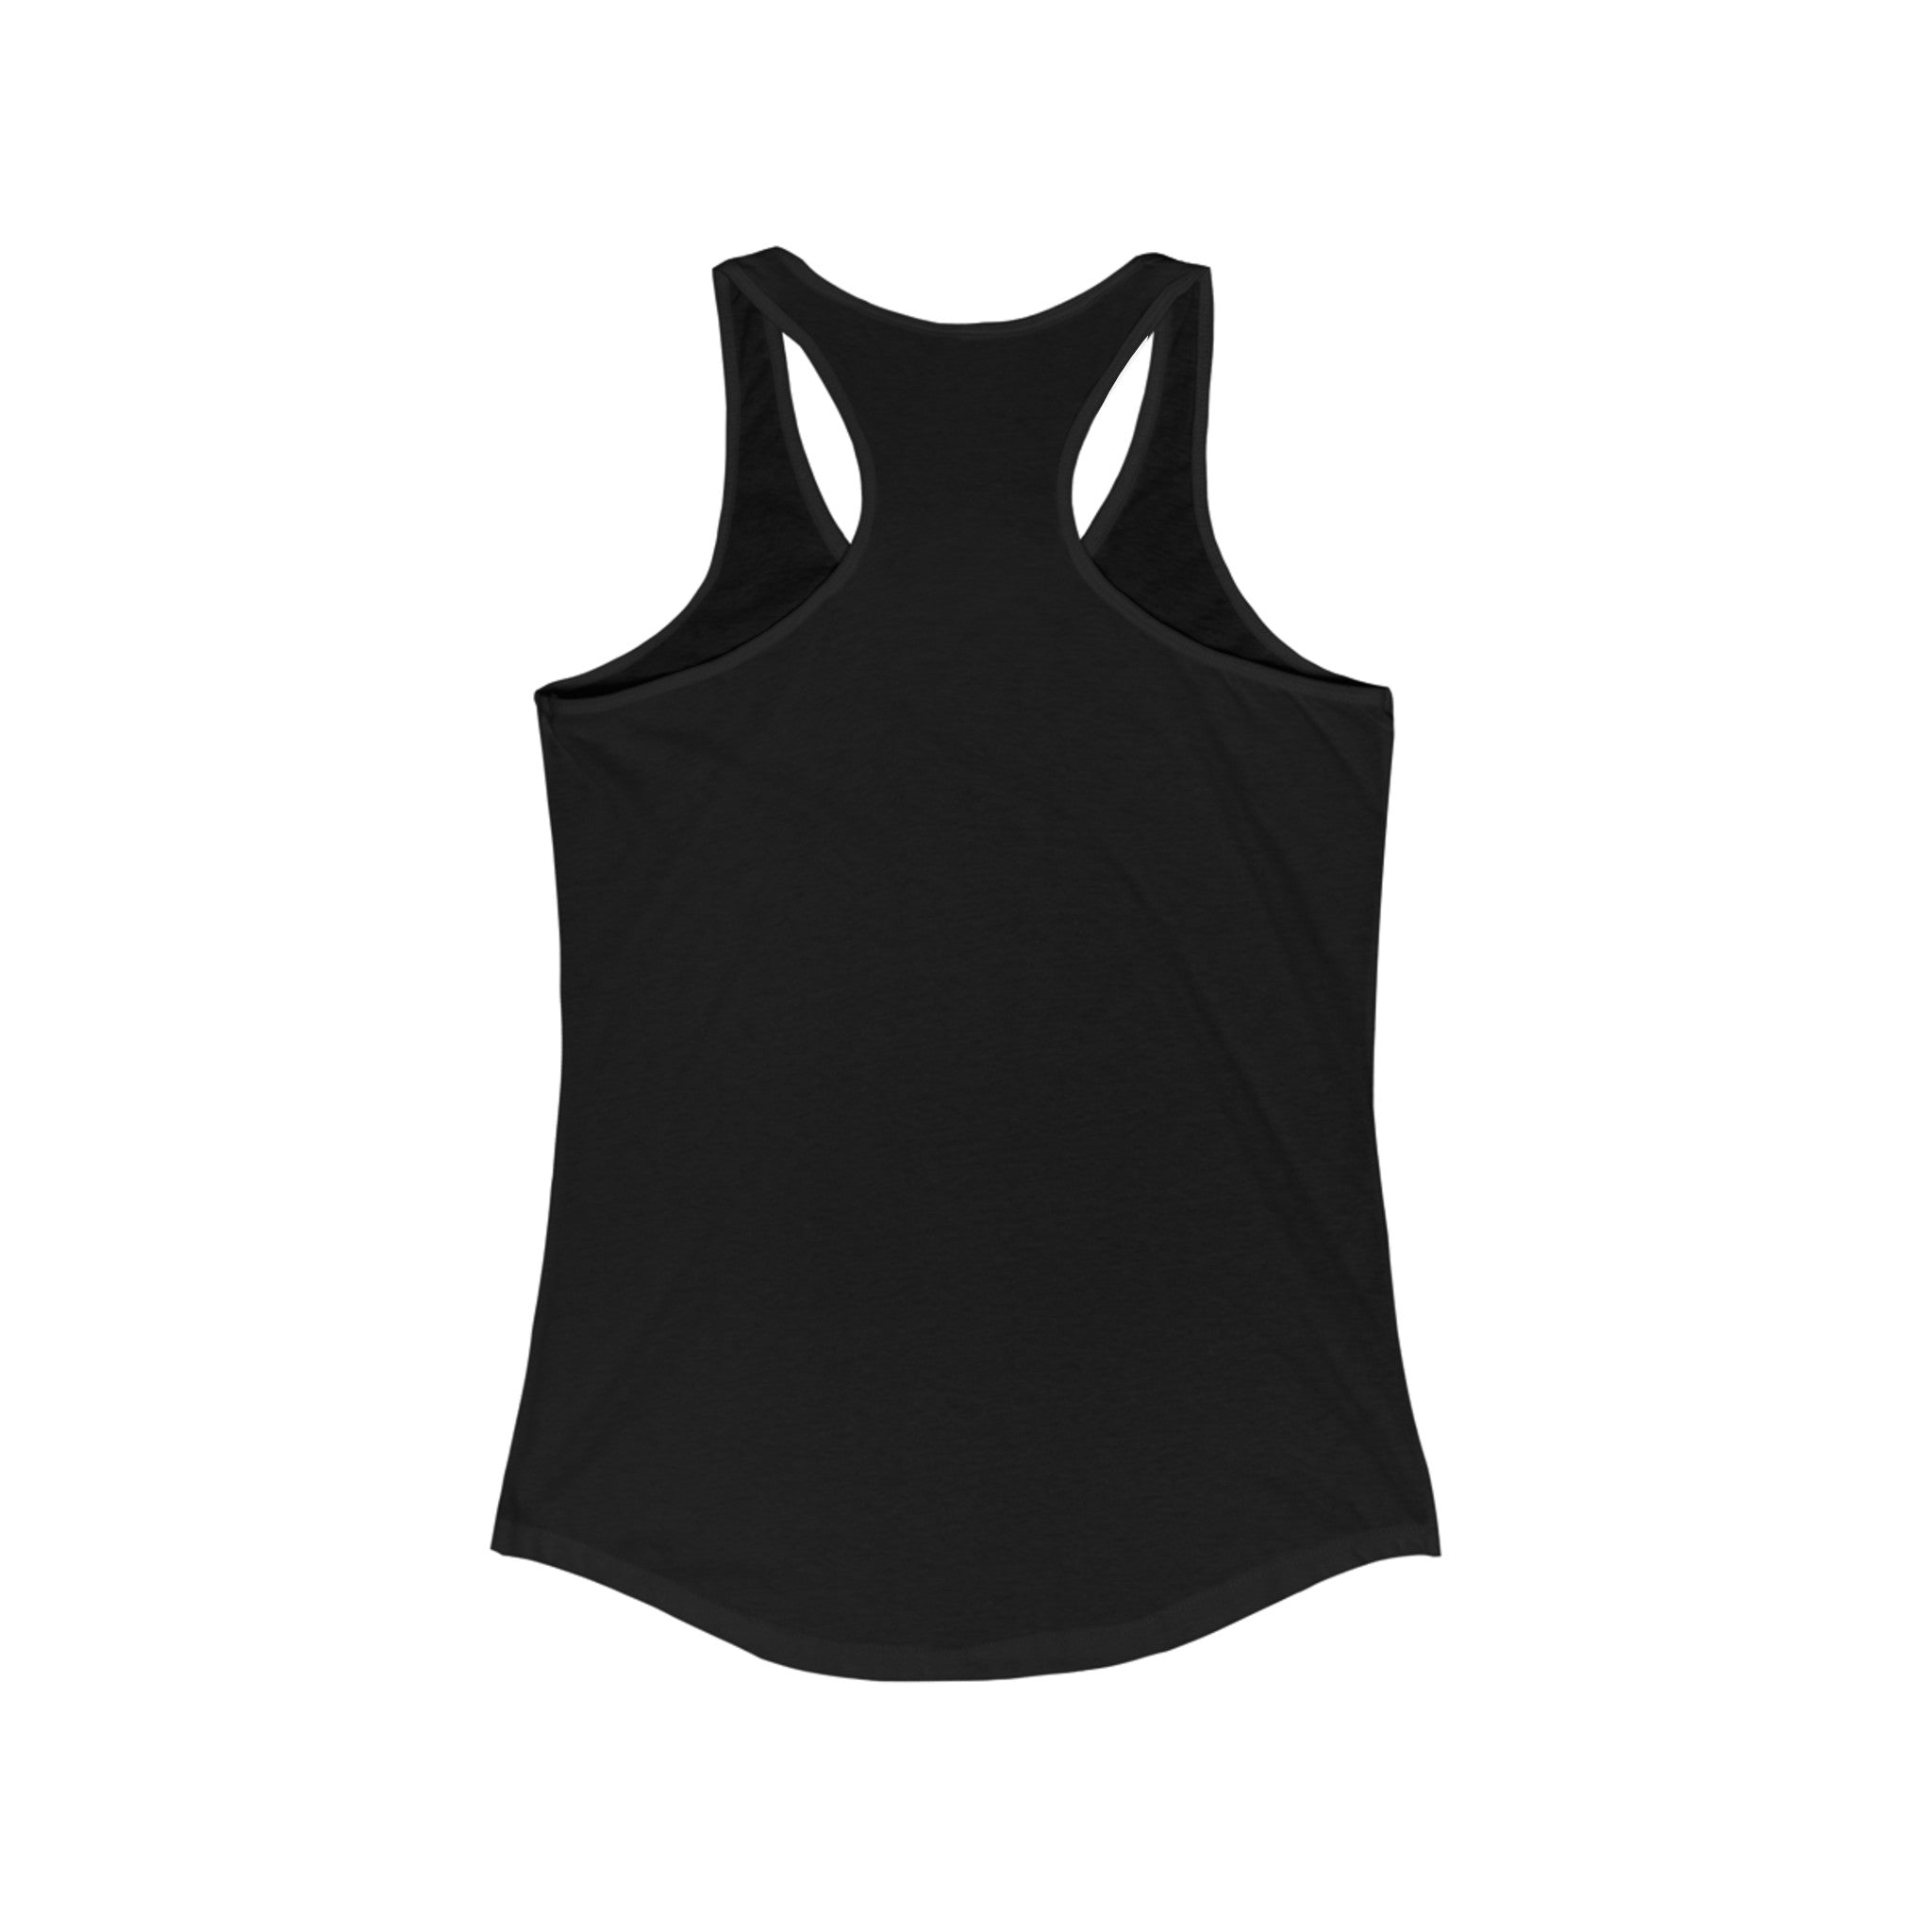 A lightweight Si-S Light Pendant - Women's Racerback Tank is displayed on a white background, showing the back view—perfect for an active lifestyle.